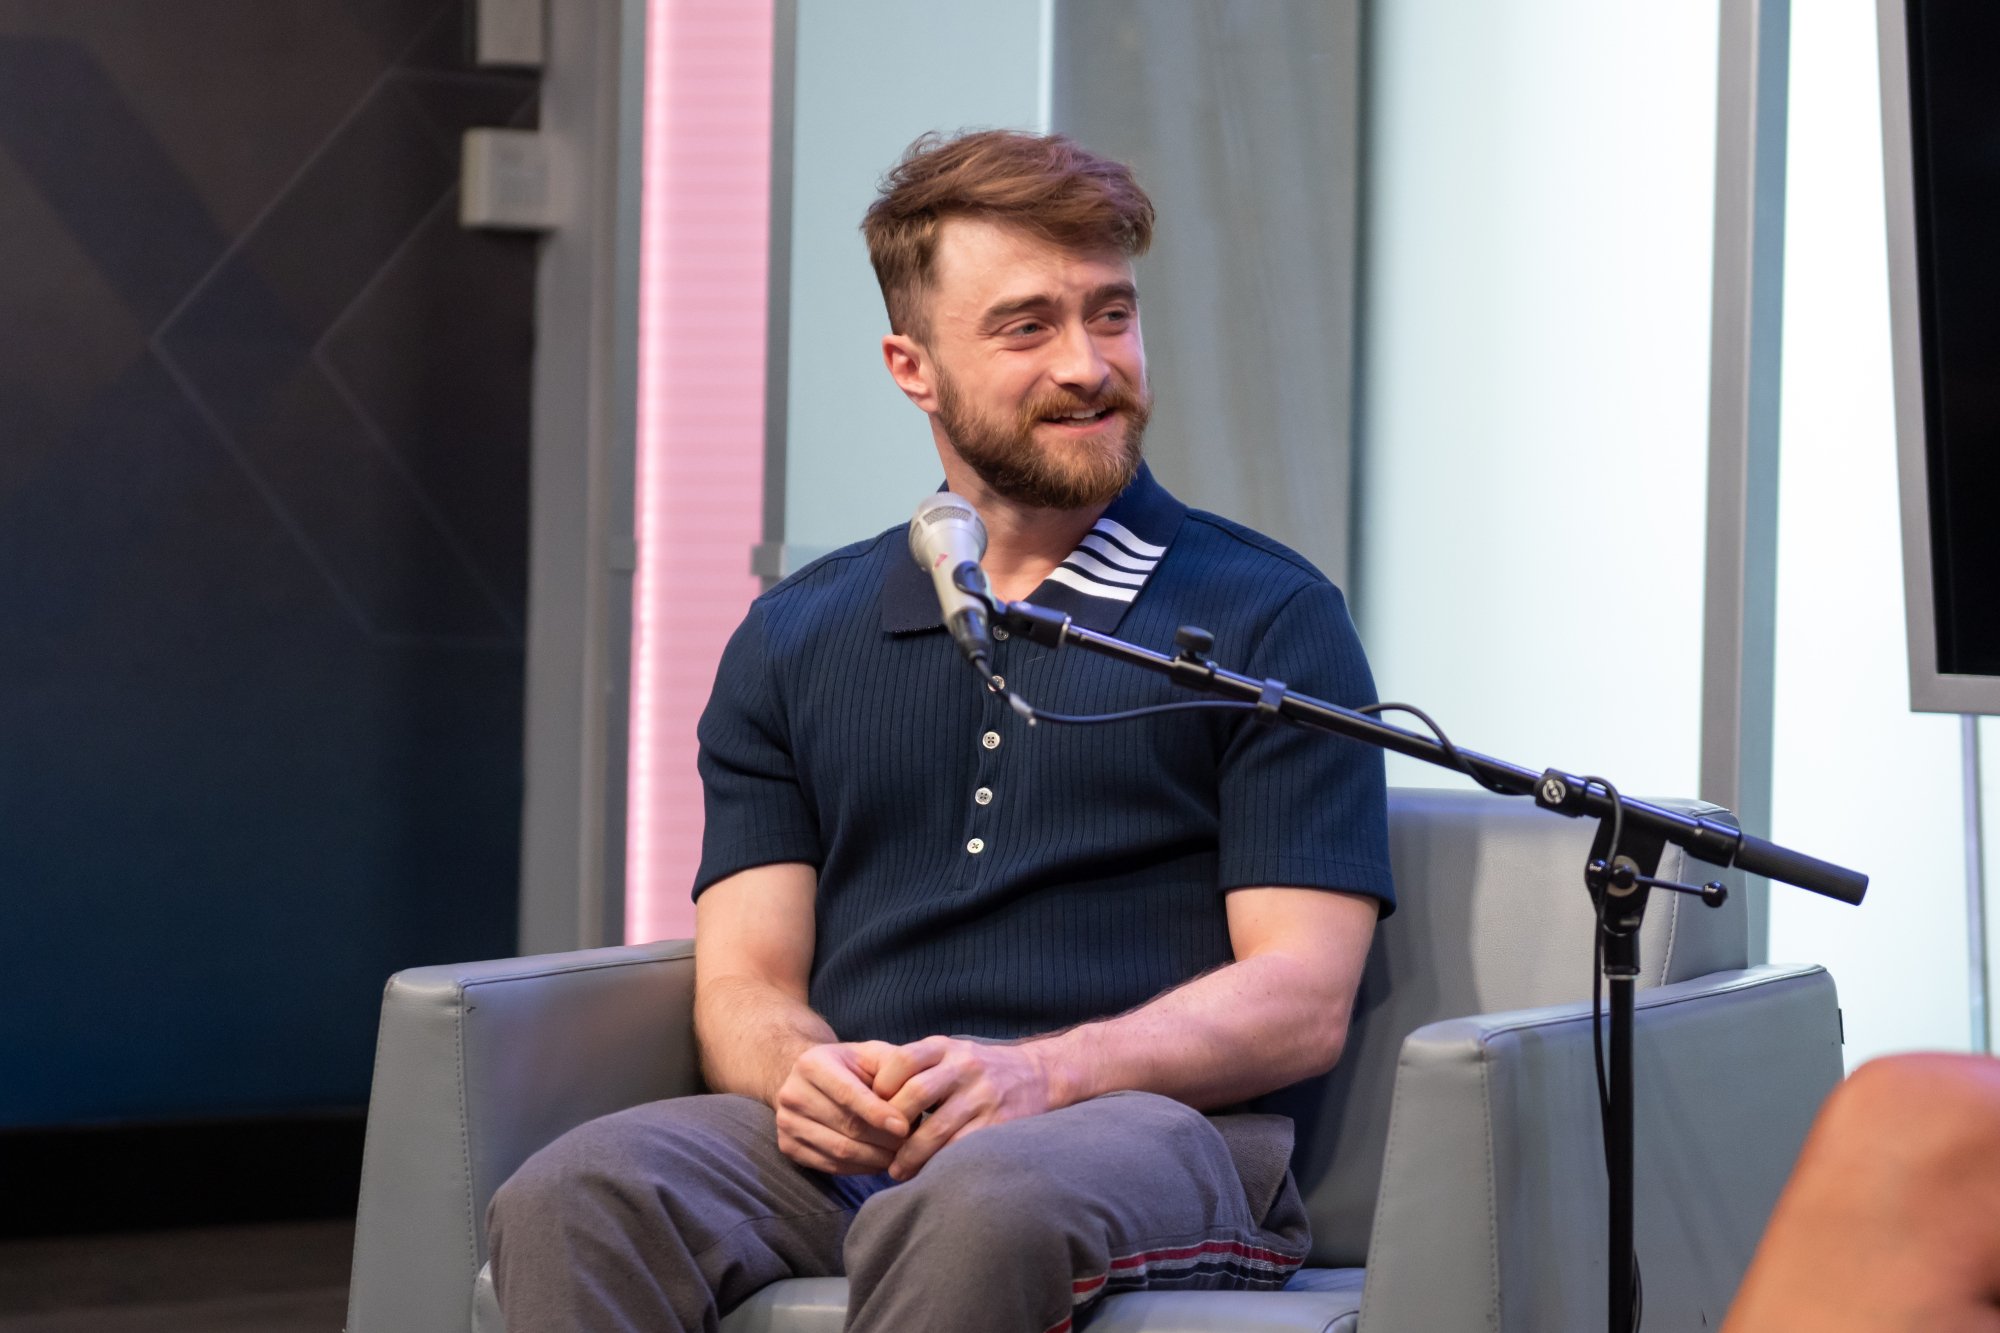 ‘Weird: The Al Yankovic Story’ Fans React to an ‘Absolutely Shredded’ Daniel Radcliffe